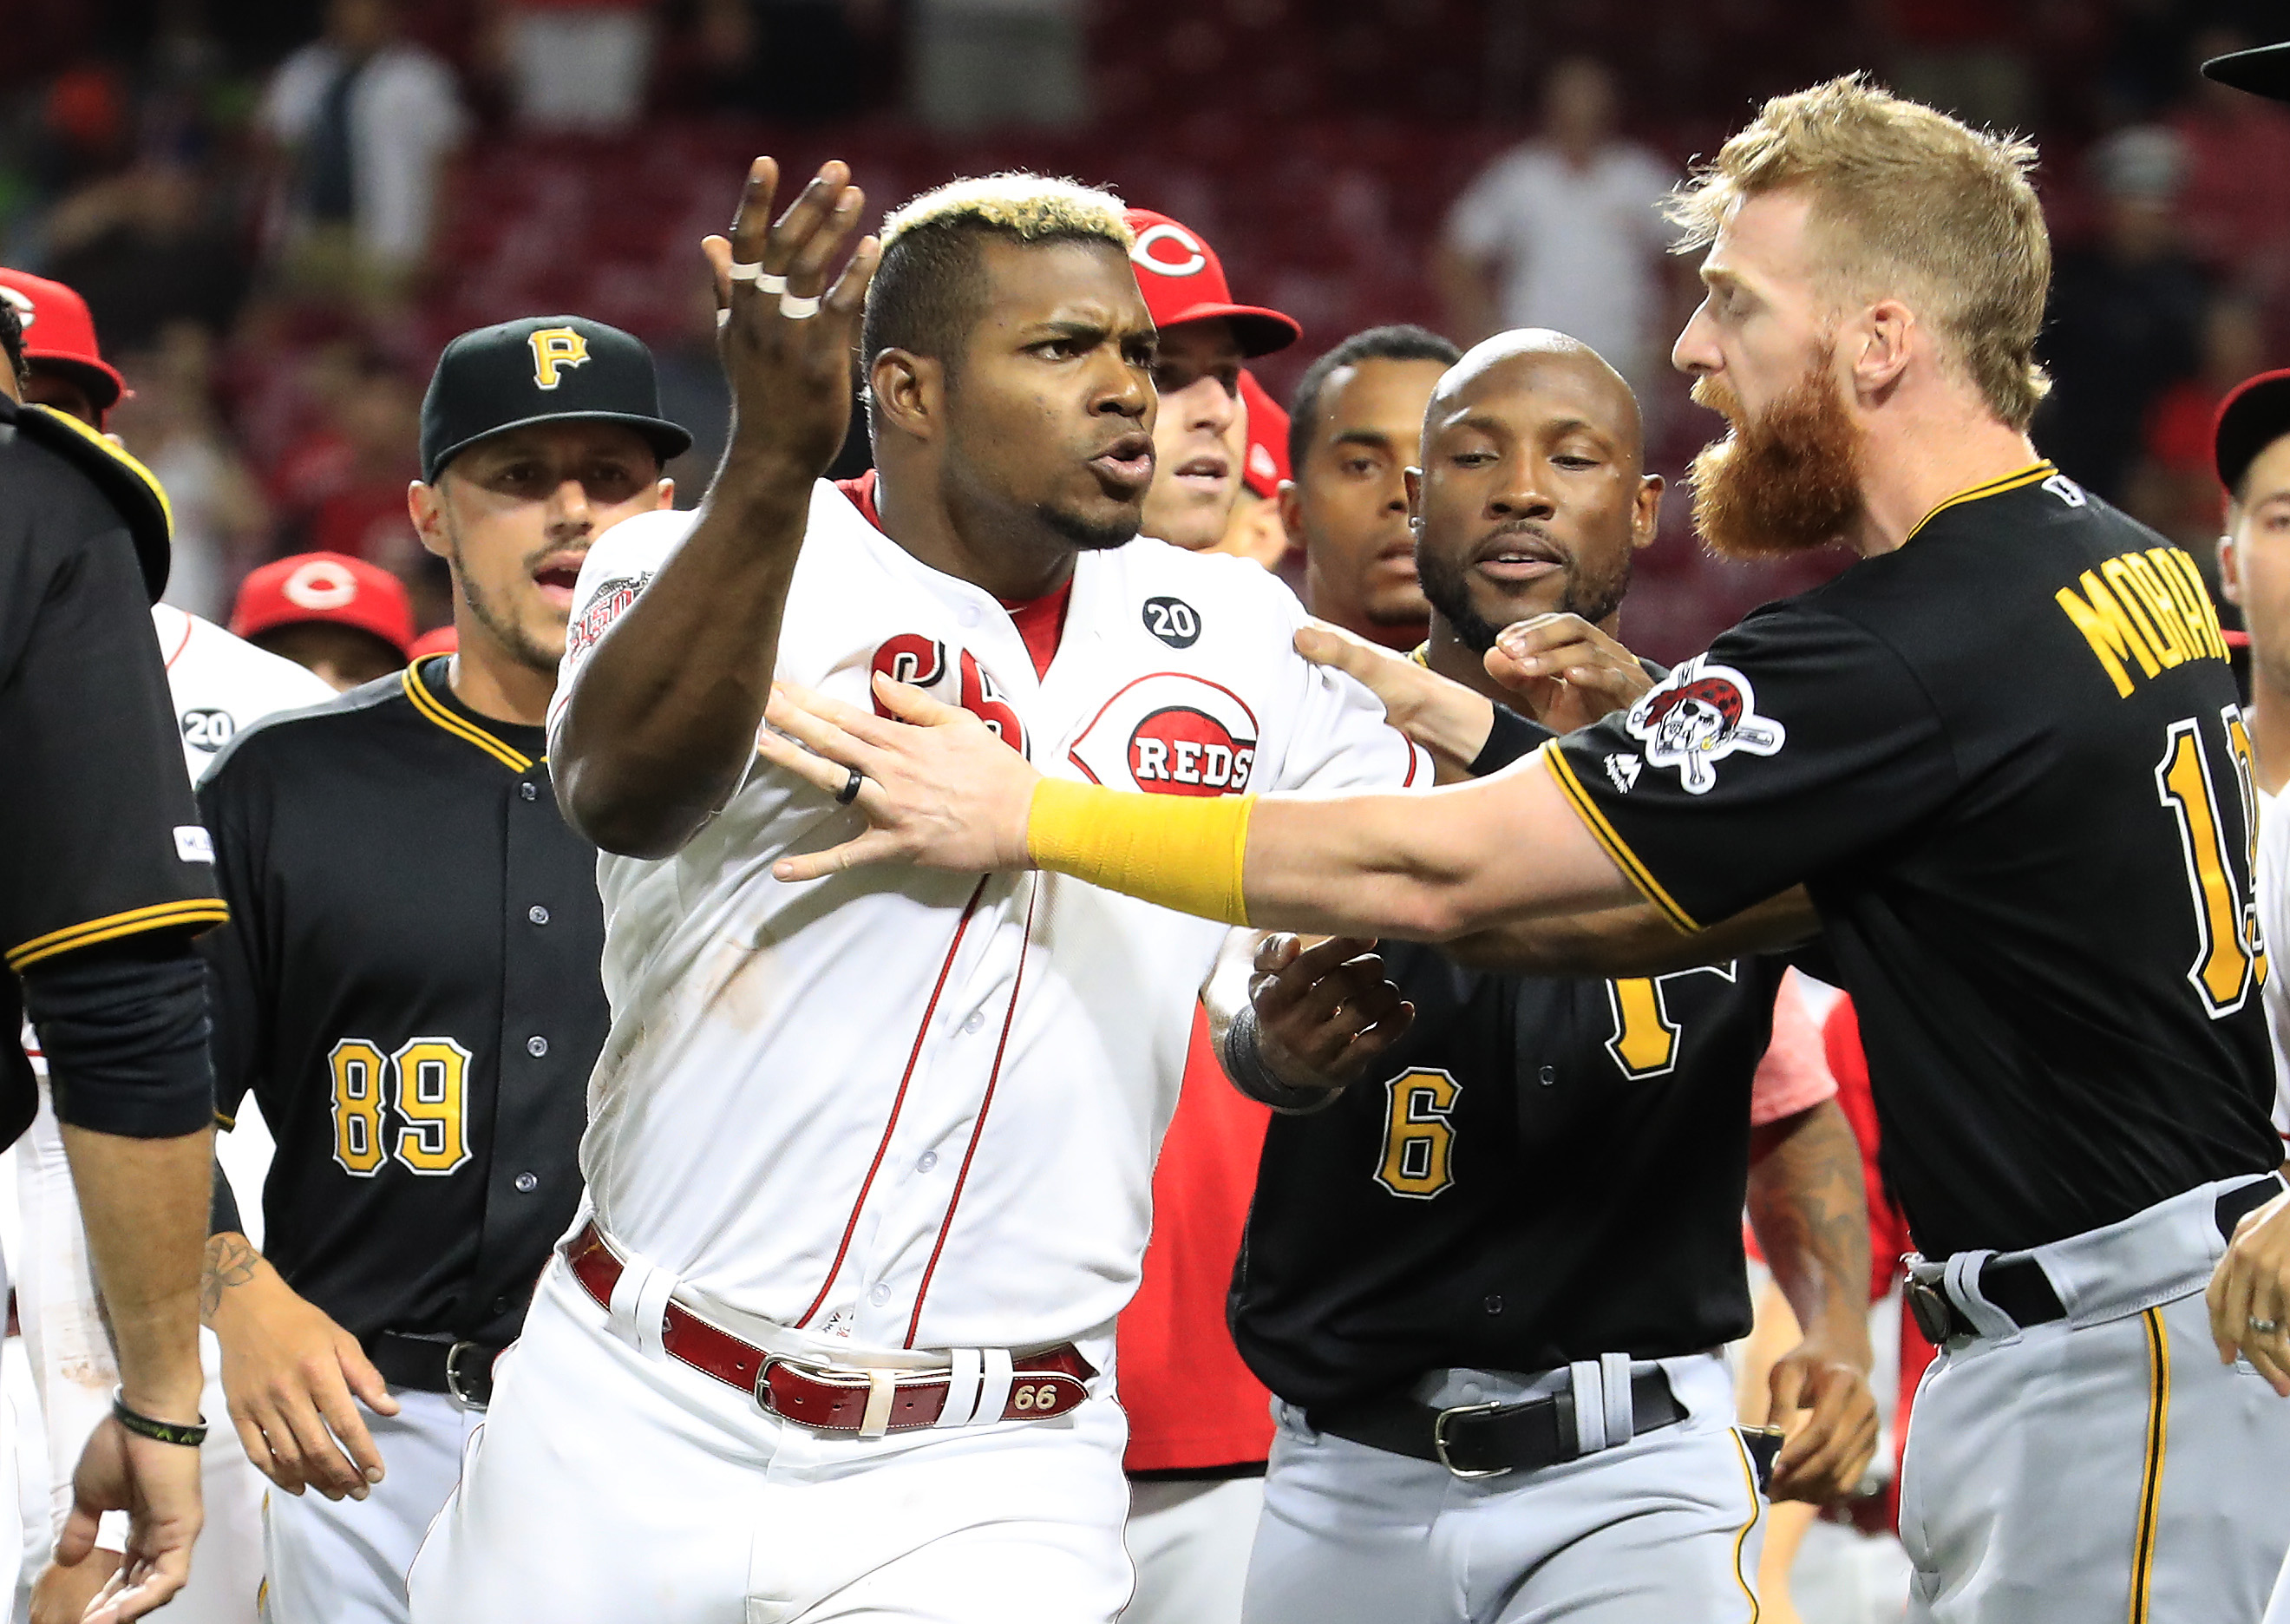 Cincinnati Reds legend Yasiel Puig traded mid-game, still fights the  Pirates for old time's sake, This is the Loop